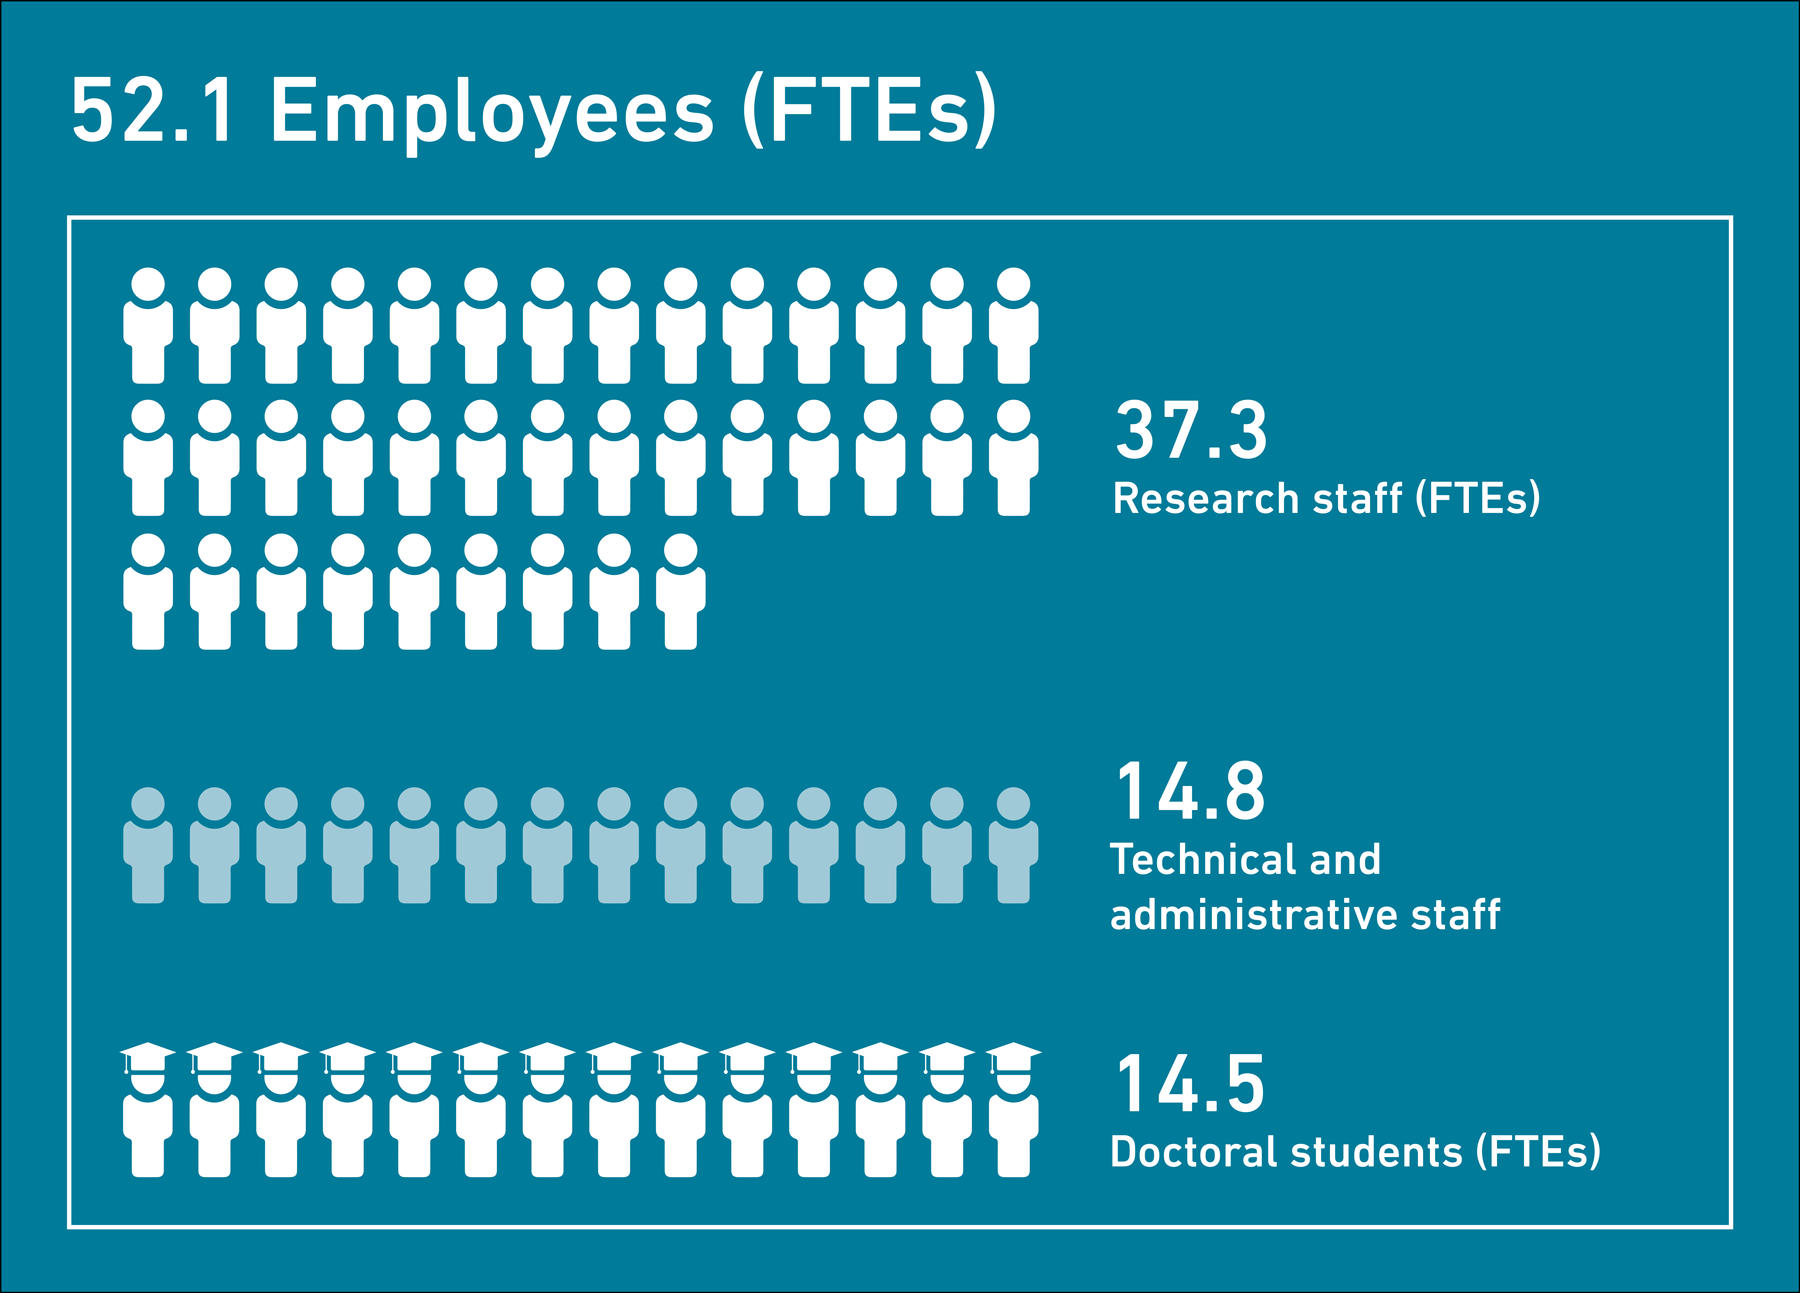 Enlarged view: 52.1 Employees (FTEs)